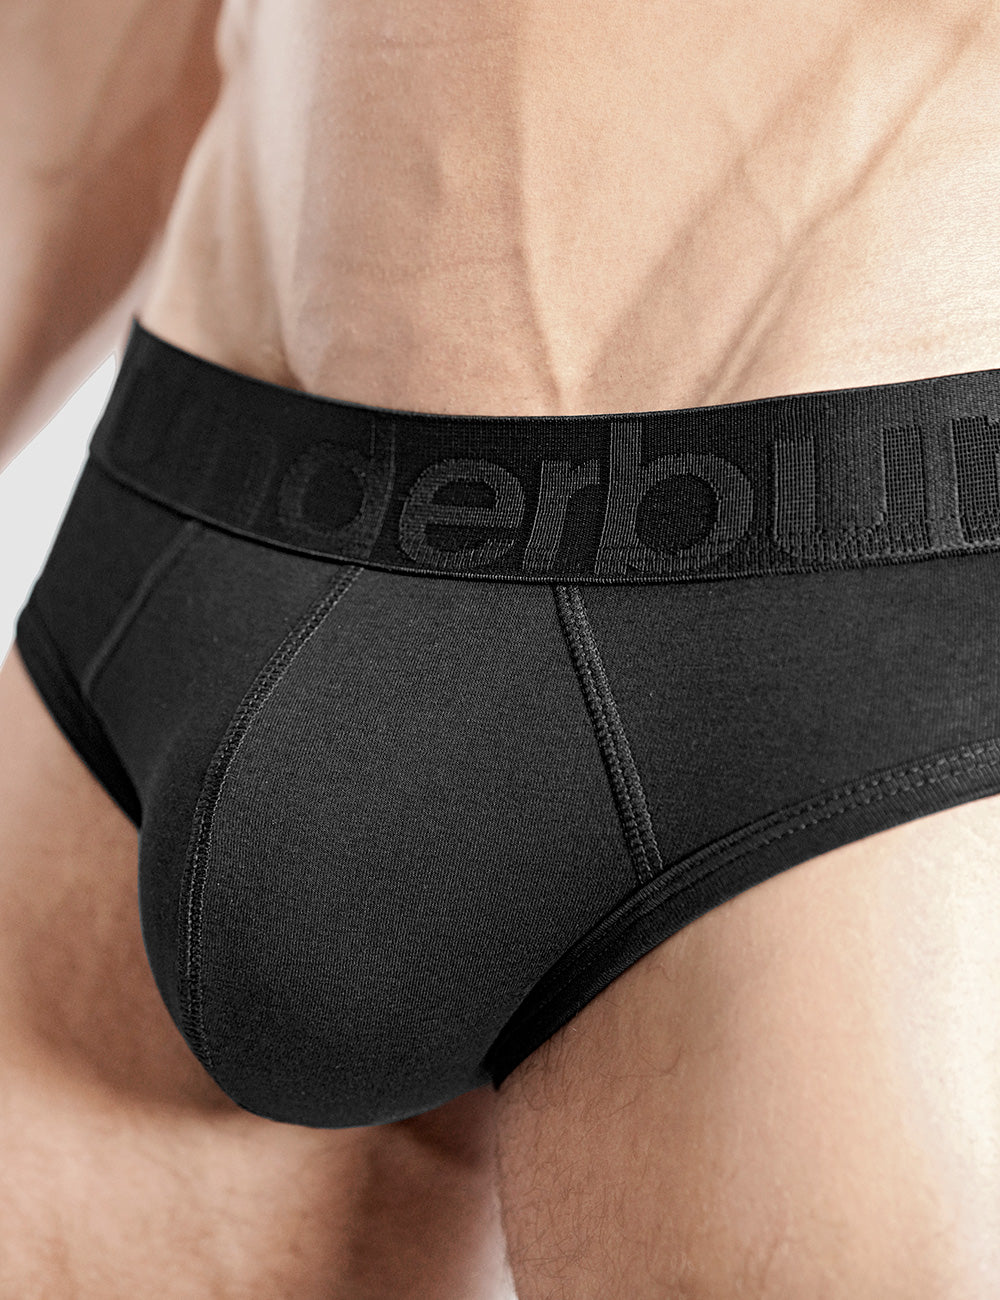 Men's Booty Lift Rounderbum Brief Padded Lifting Underwear Butt Booster  Push Up Trunks Shorts with Hip Removable Pad (Color : Black, Size : Small)  at  Men's Clothing store